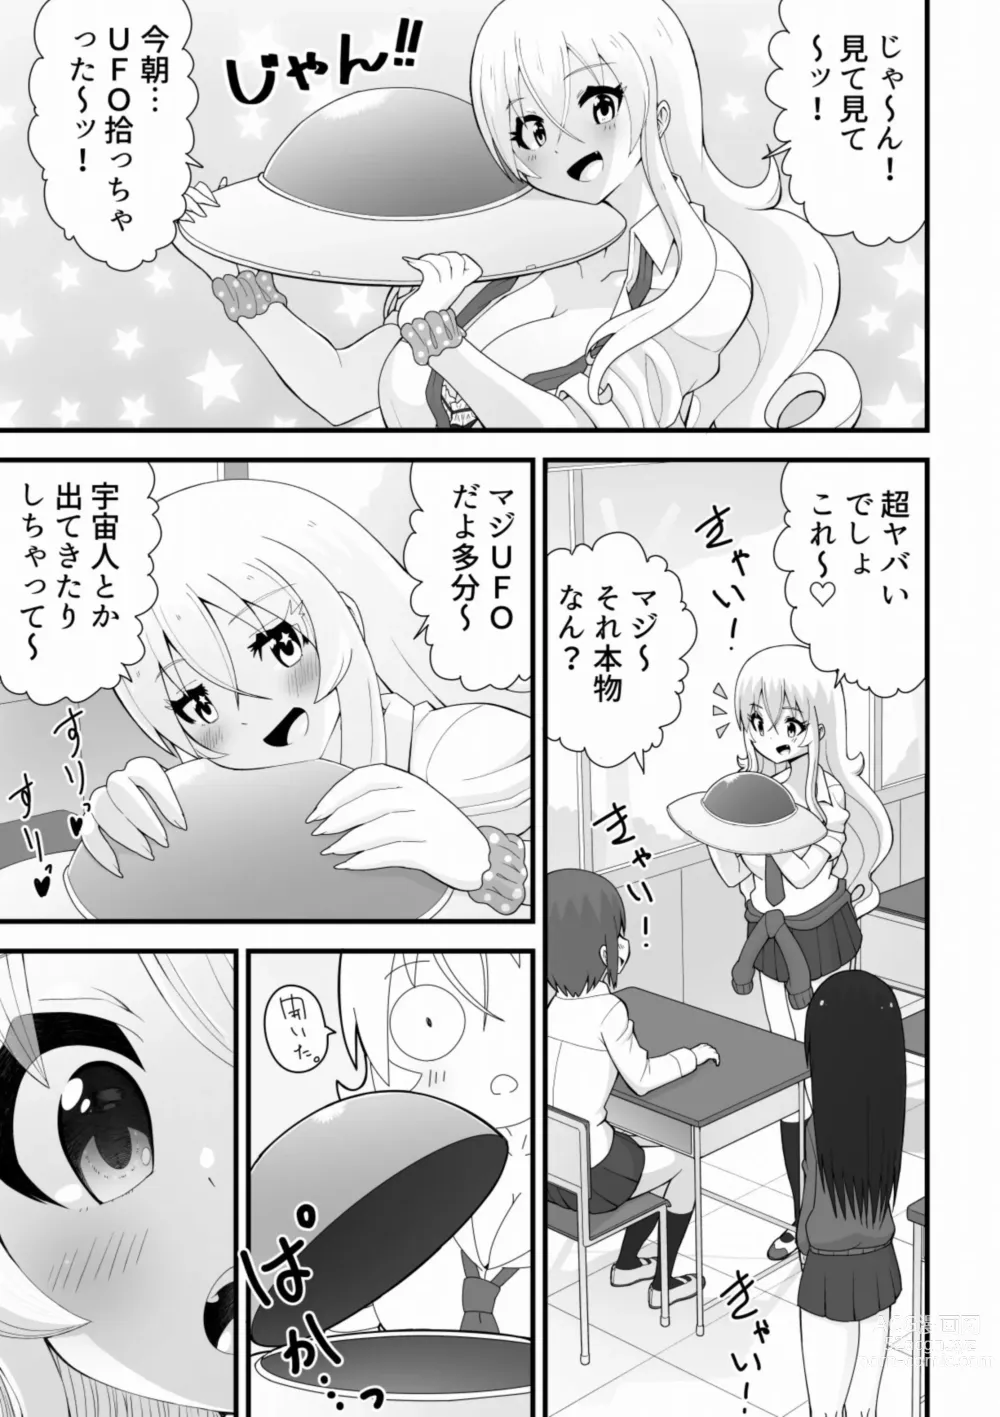 Page 3 of doujinshi A story about a big gal and a small alien making a child